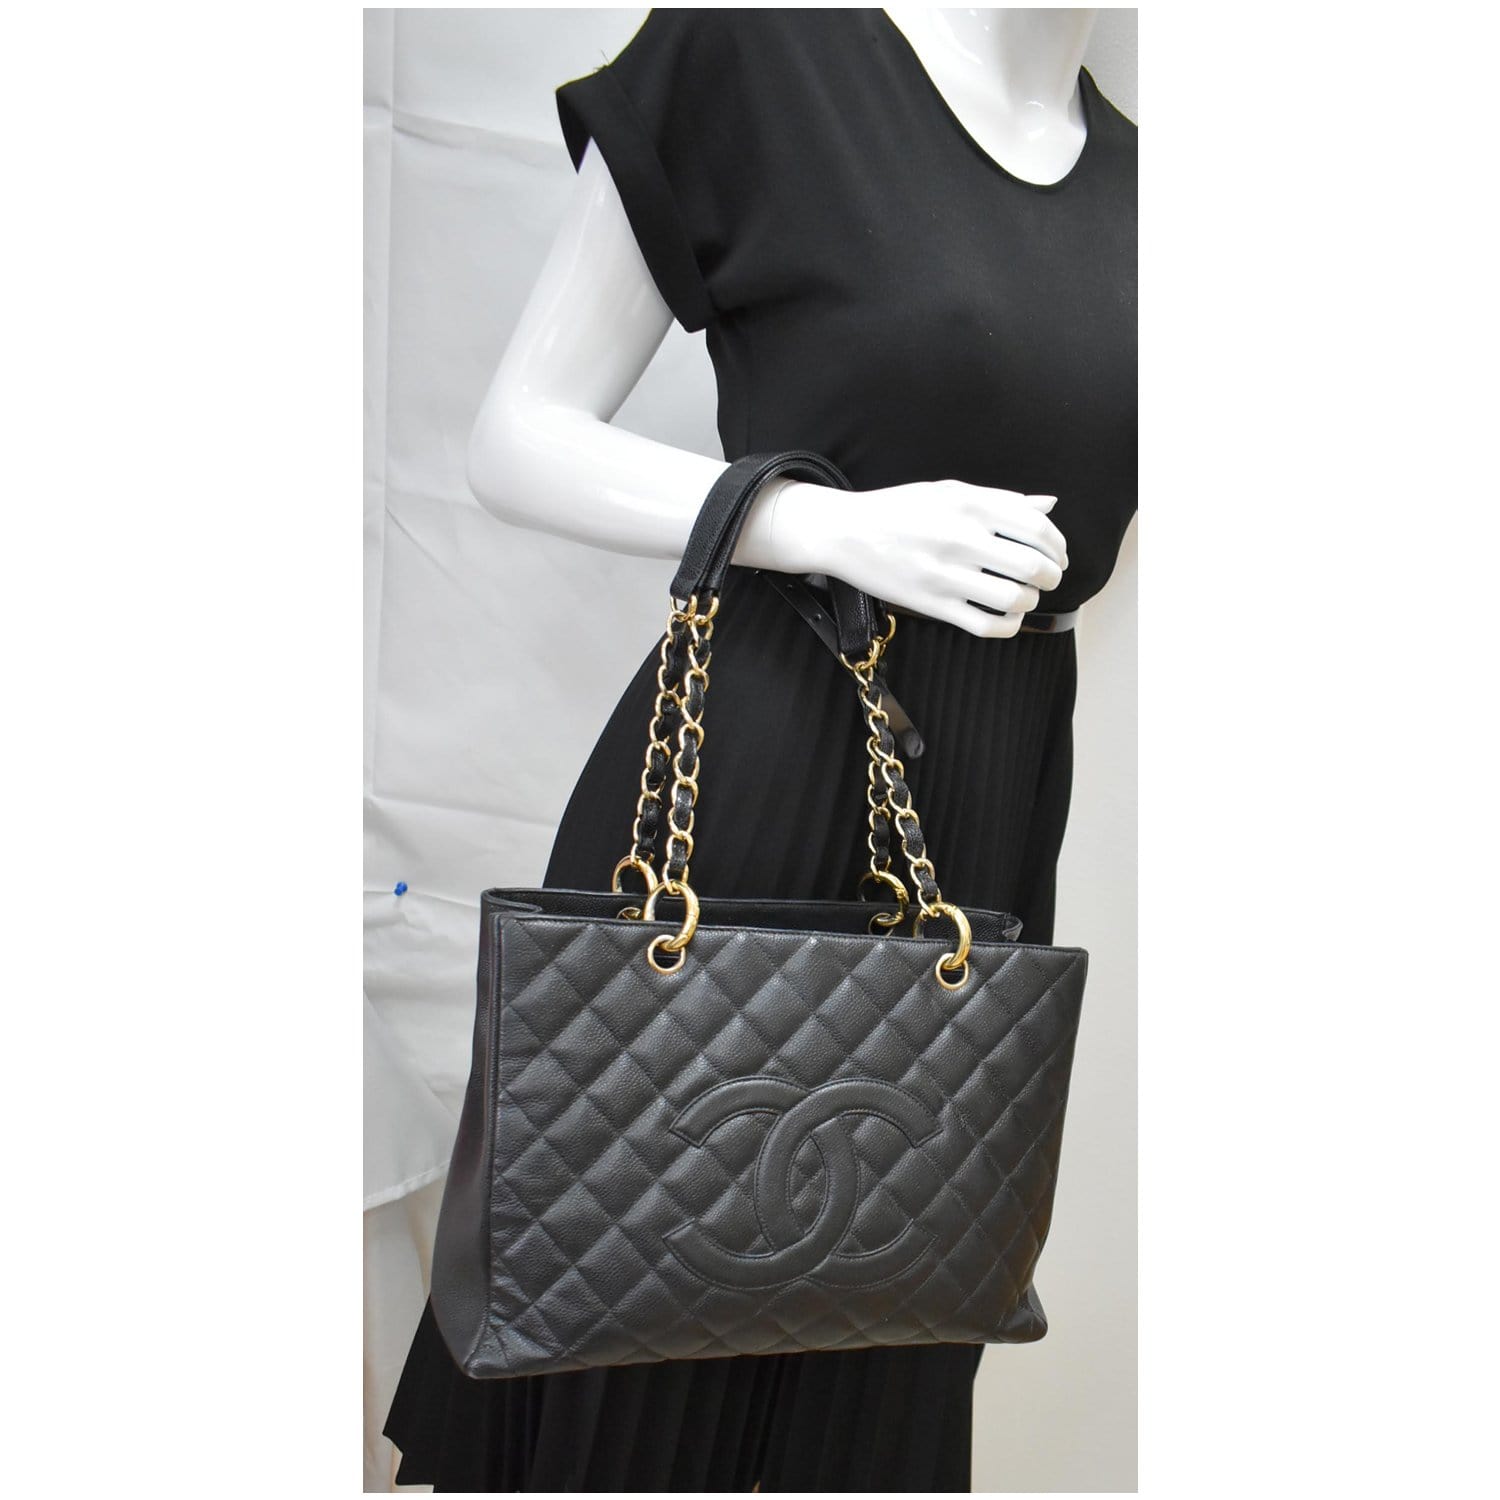 CHANEL black Caviar Leather gold hw GST Grand Shopping Tote Bag